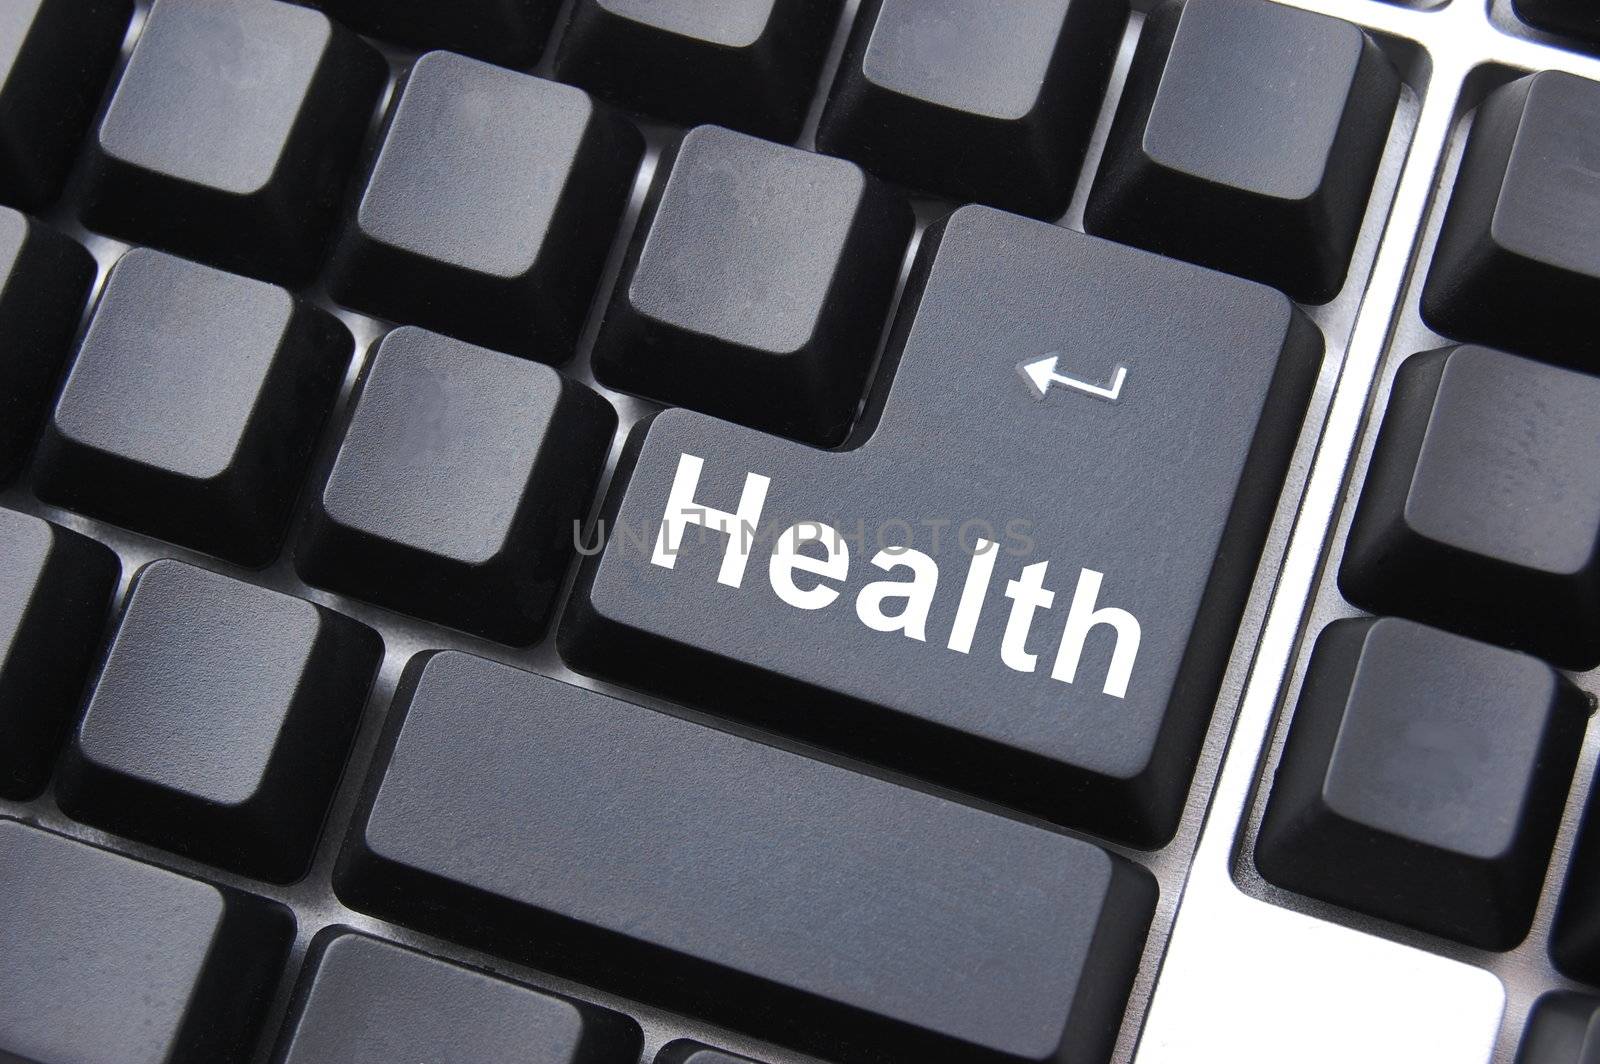 healthy lifestyle shown by health computer button